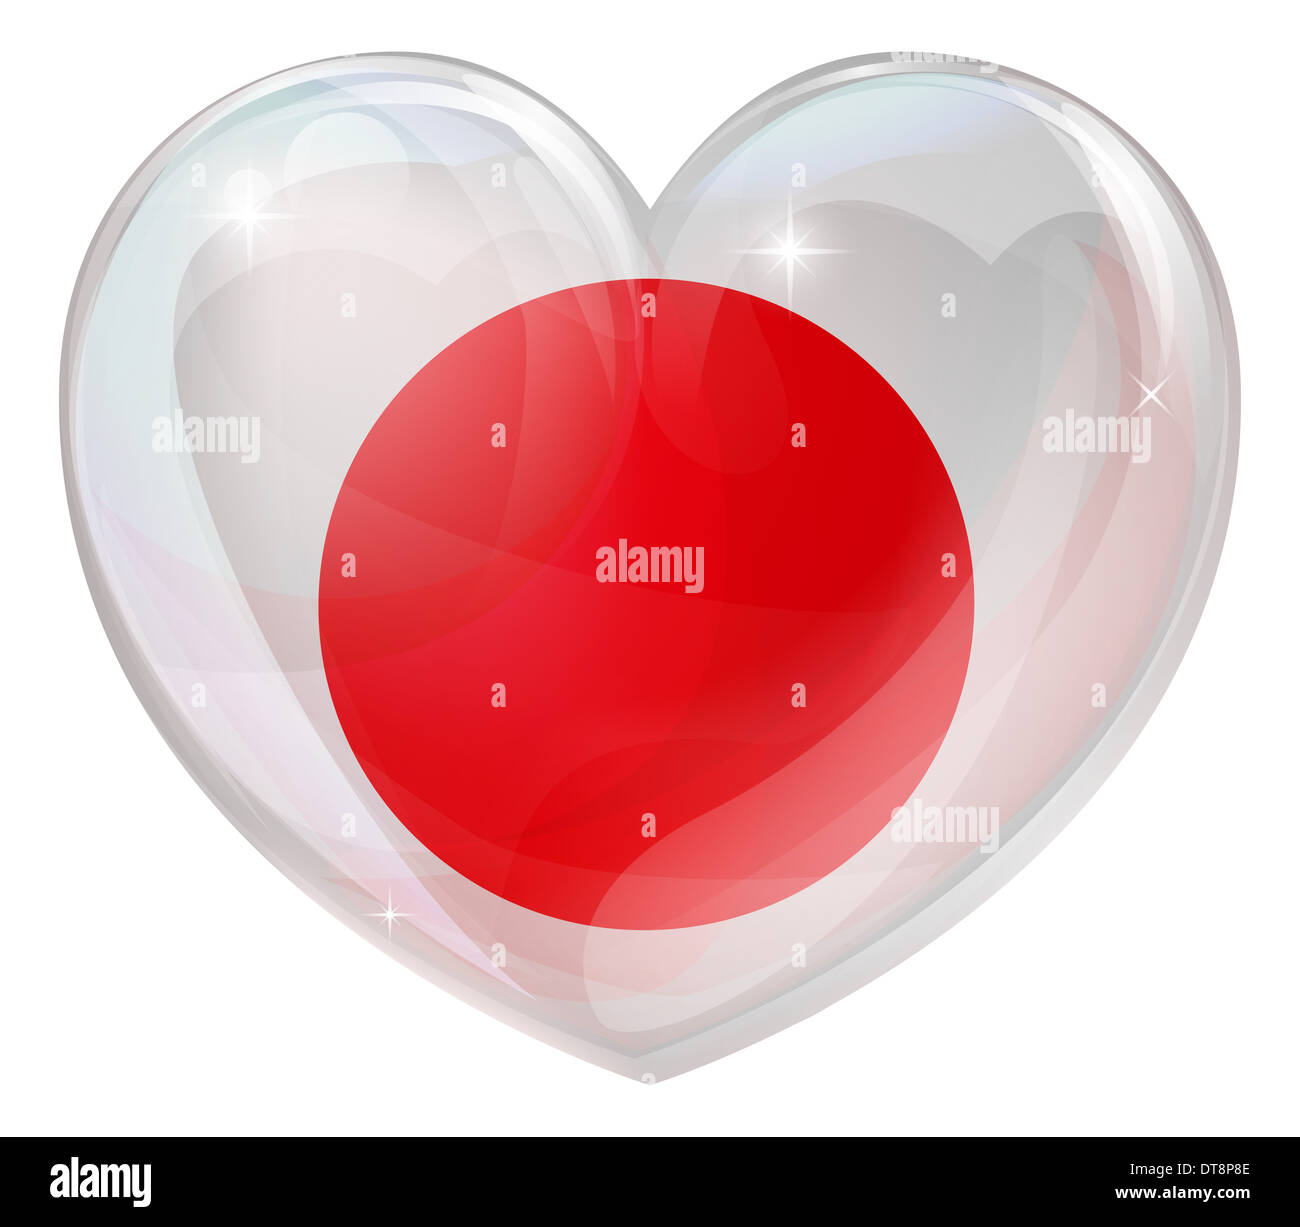 Japan flag love heart concept with the Japanese flag in a heart shape Stock Photo